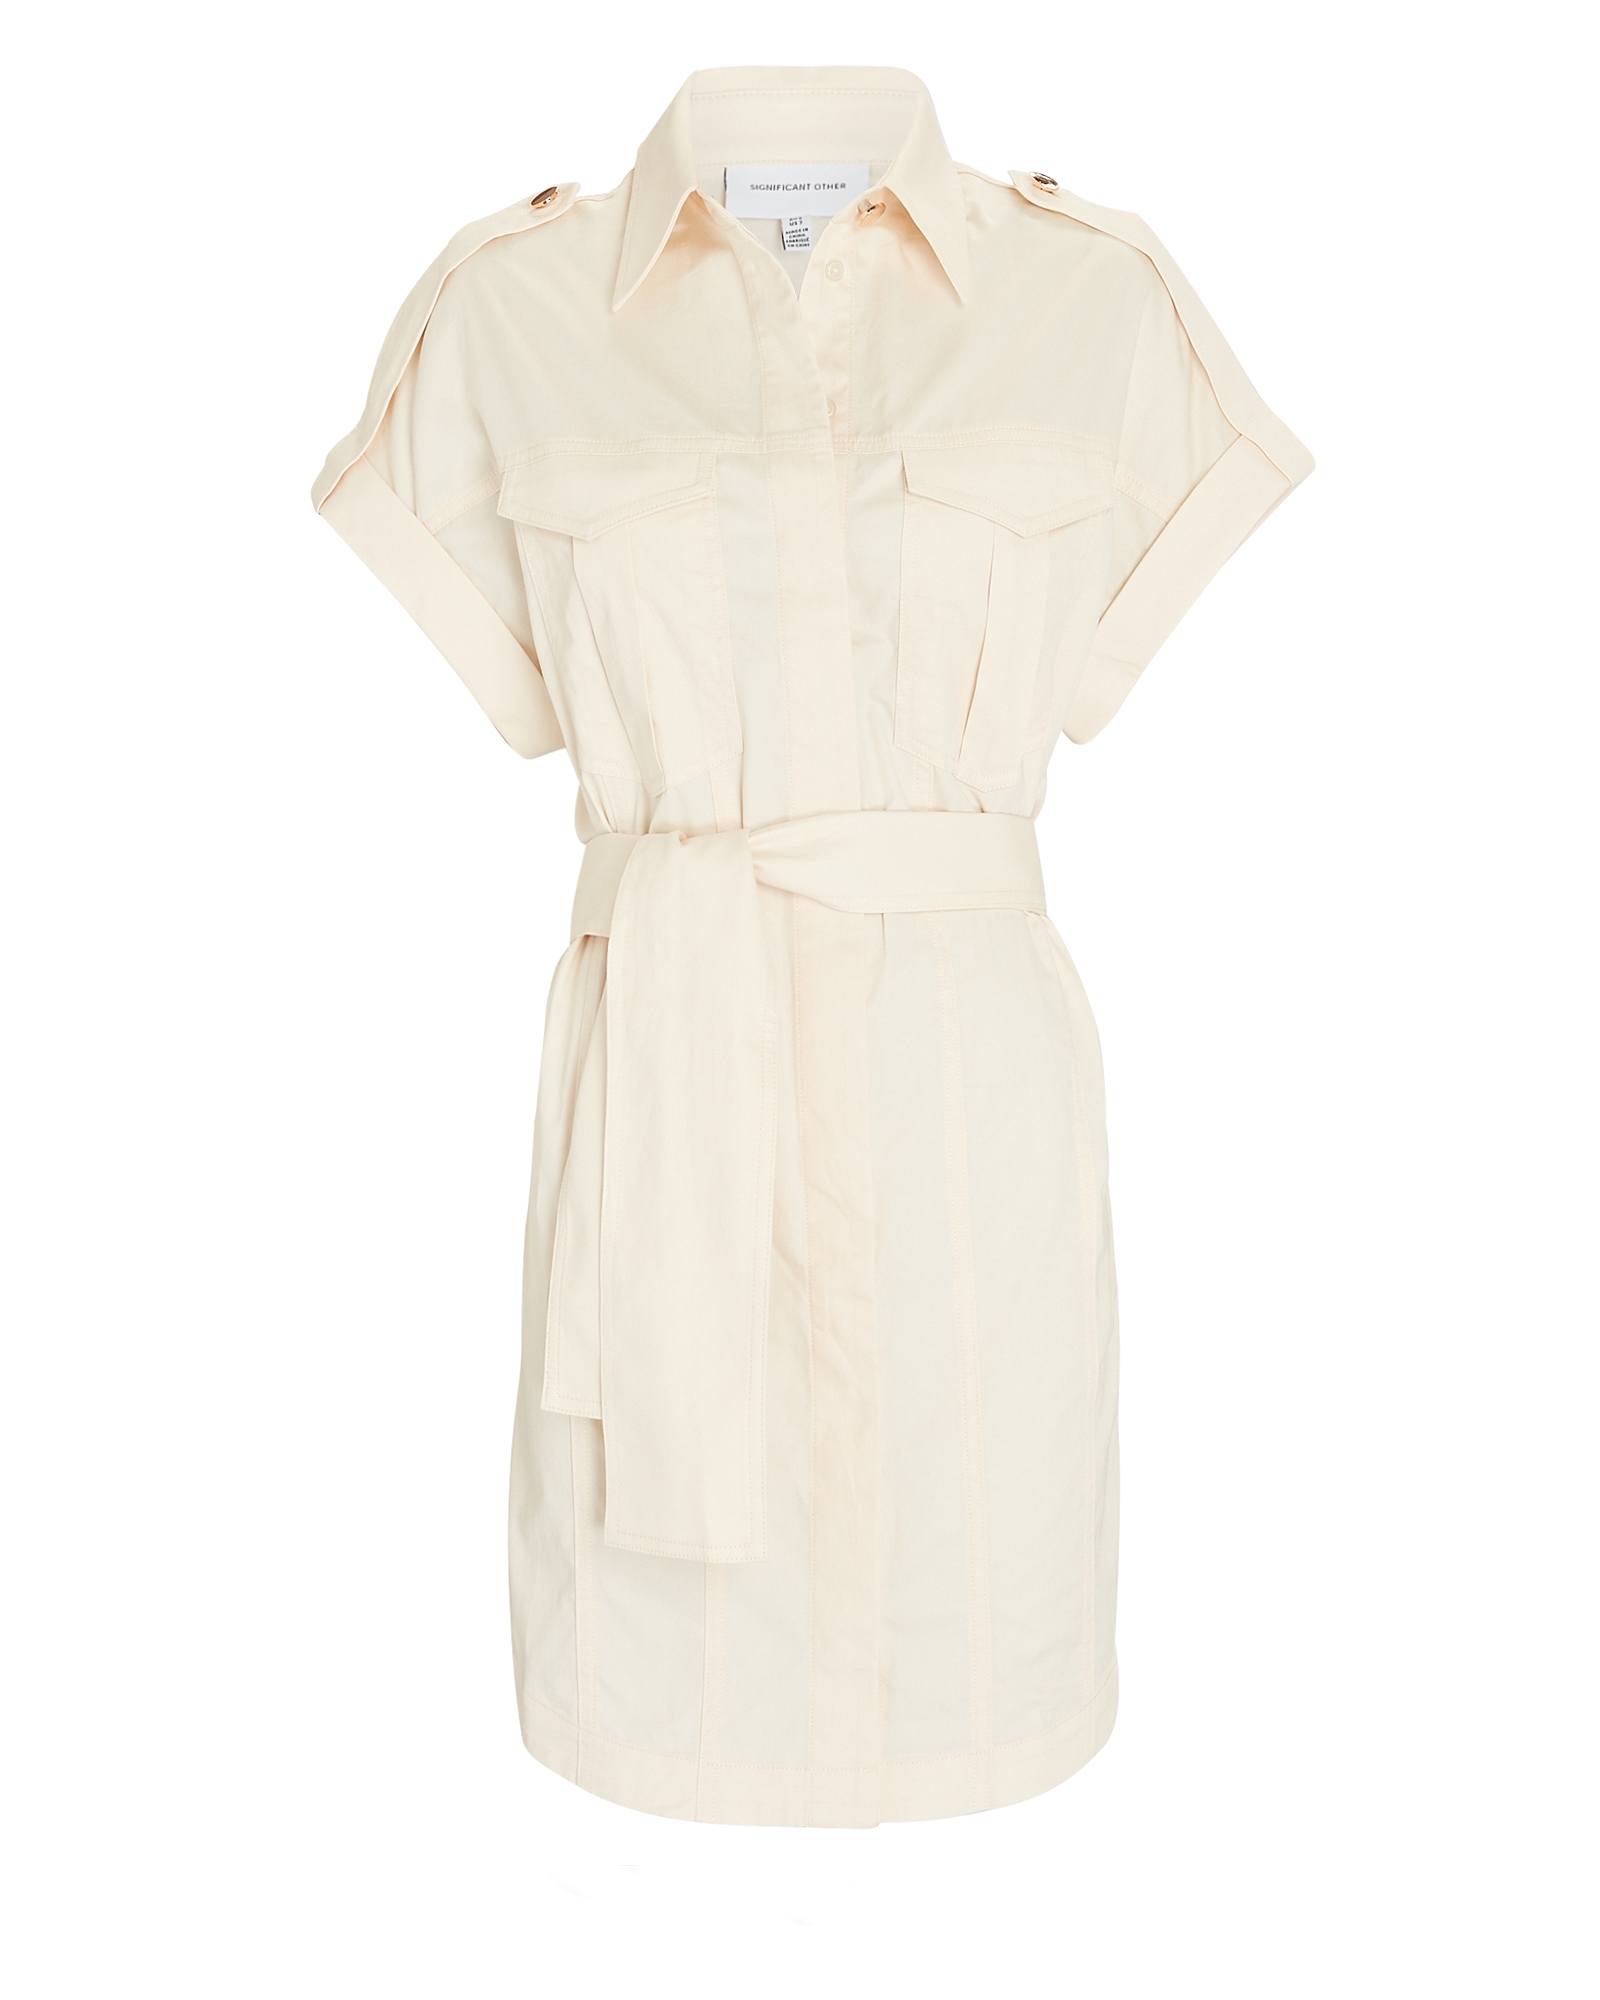 Significant Other Lenny Belted Cotton Cargo Mini Dress | INTERMIX®